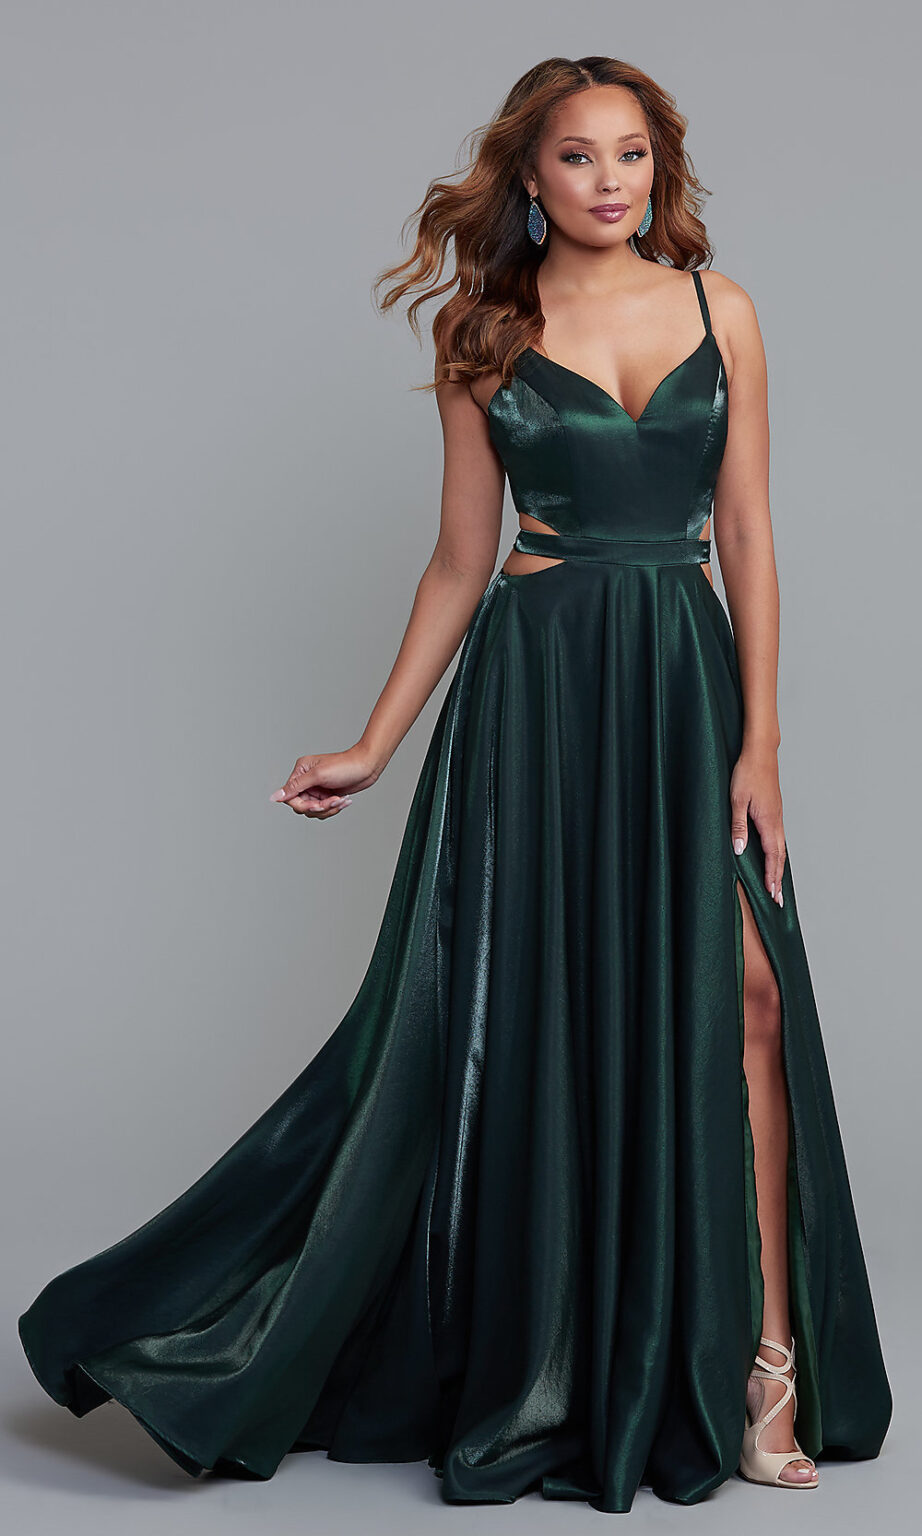 35+ Prom Dresses You Should Check Out Right Now